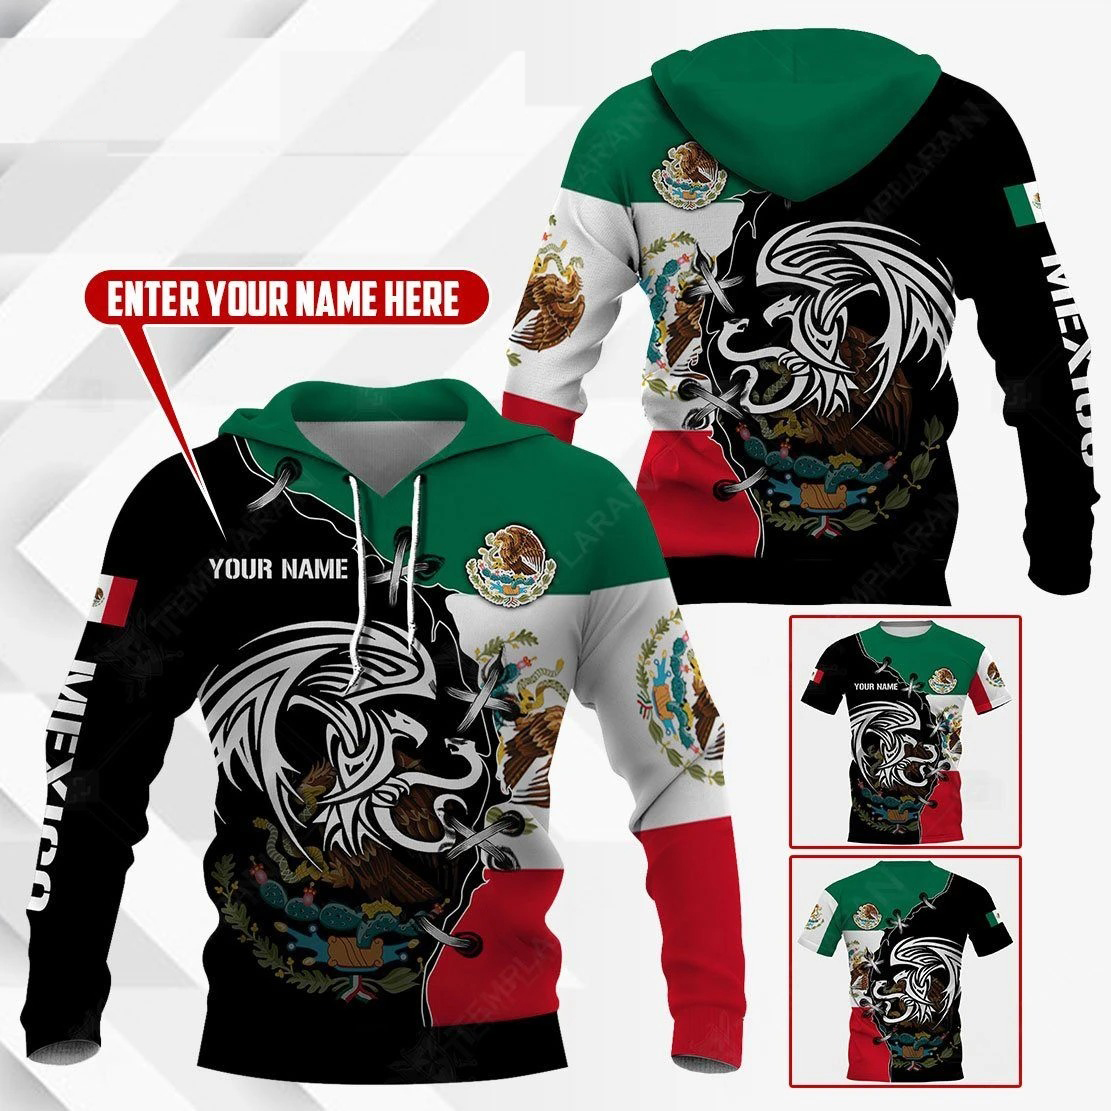 Mexico golden eagle personalize custom name 3d full printing hoodie and t-shirt – Teasearch3d 020420